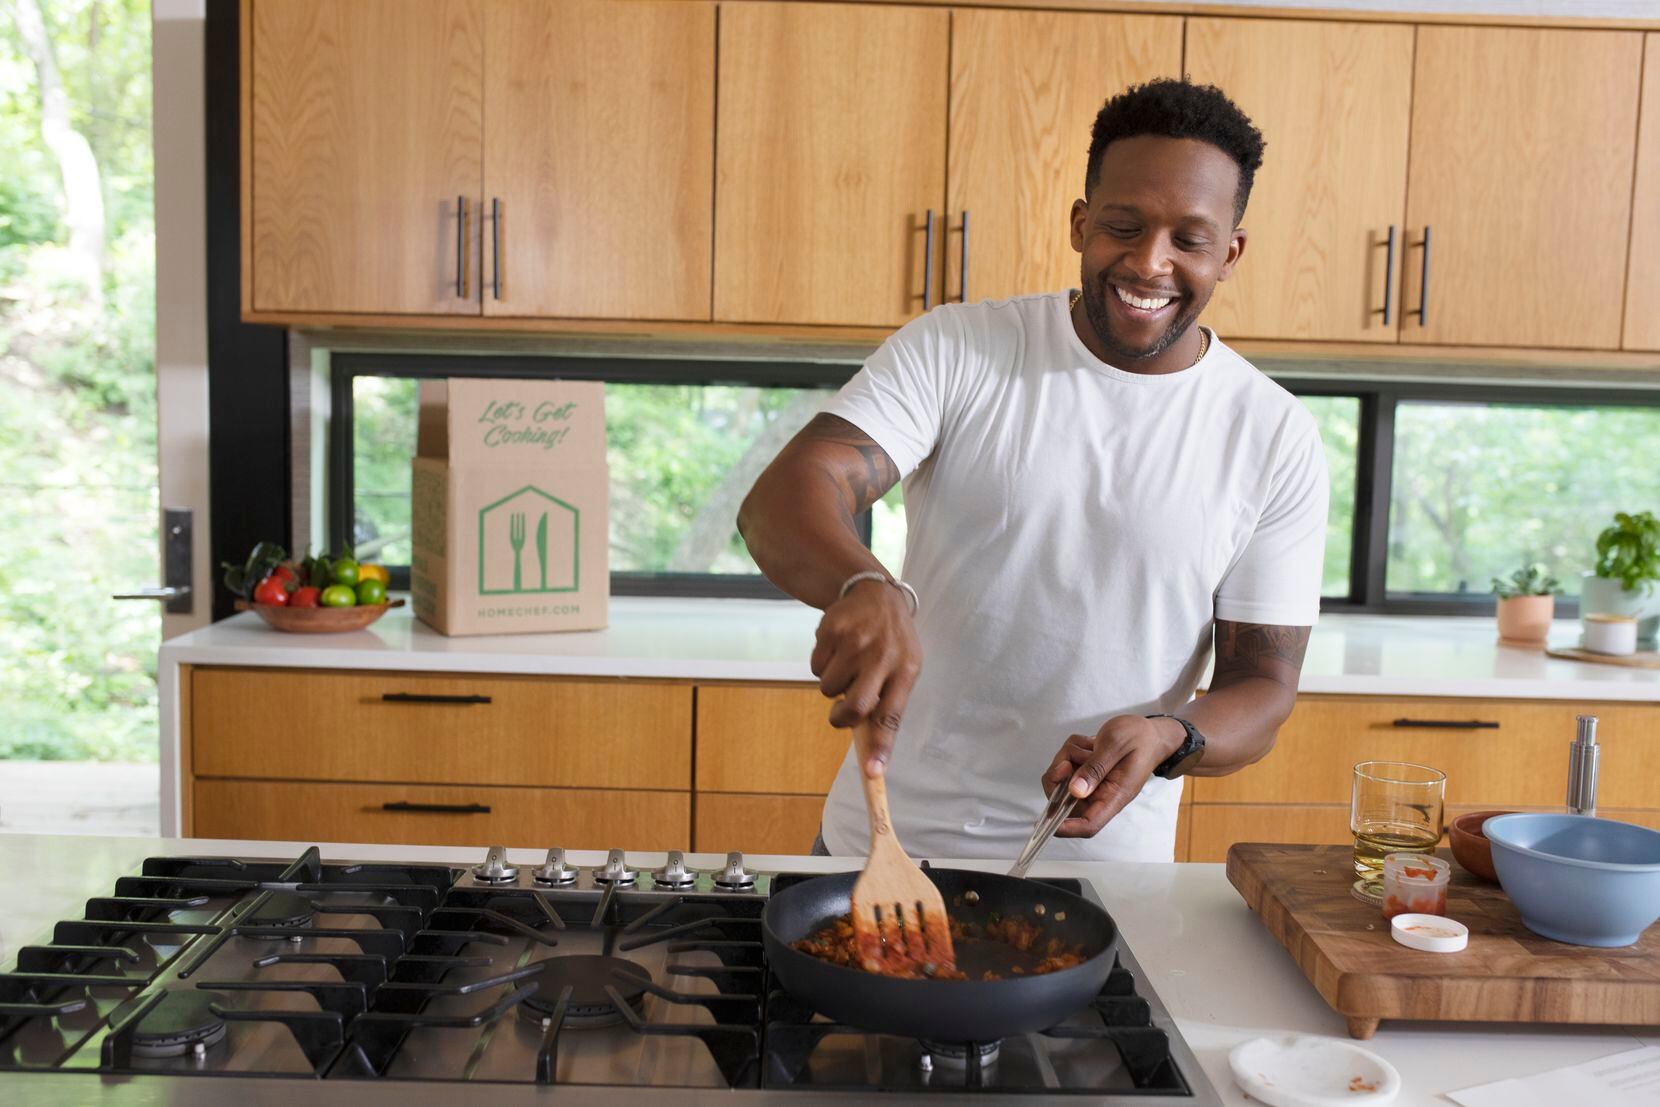 Dallas-based Kevin Curry of Fit Men Cook has a new partnership with Home Chef.